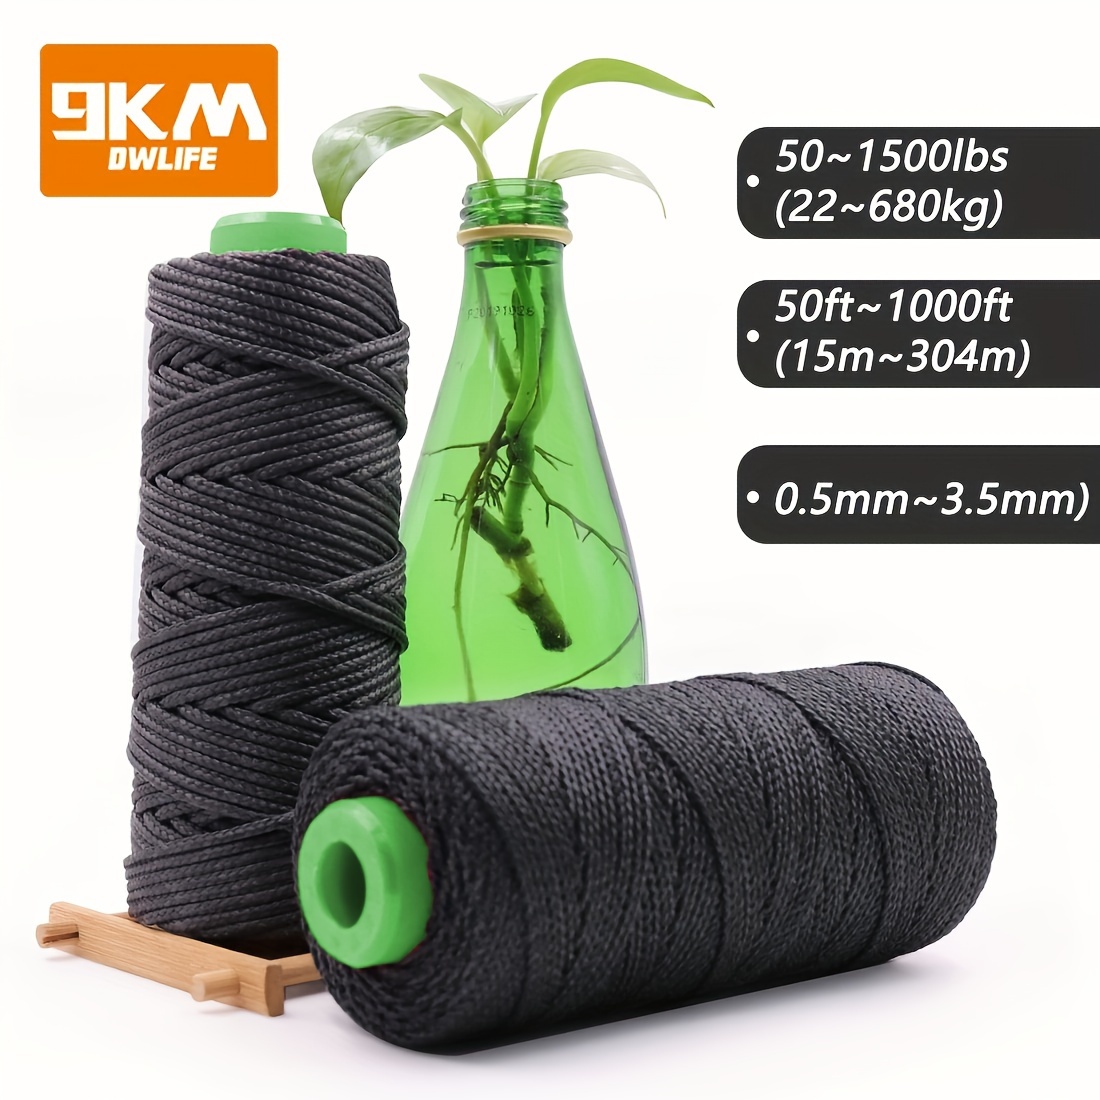 150m~600m Kite String Braided Kevlar Line 40~5000Lbs High Strength Wear  resistant Fishing Line Thread Camping Backpacking Cord